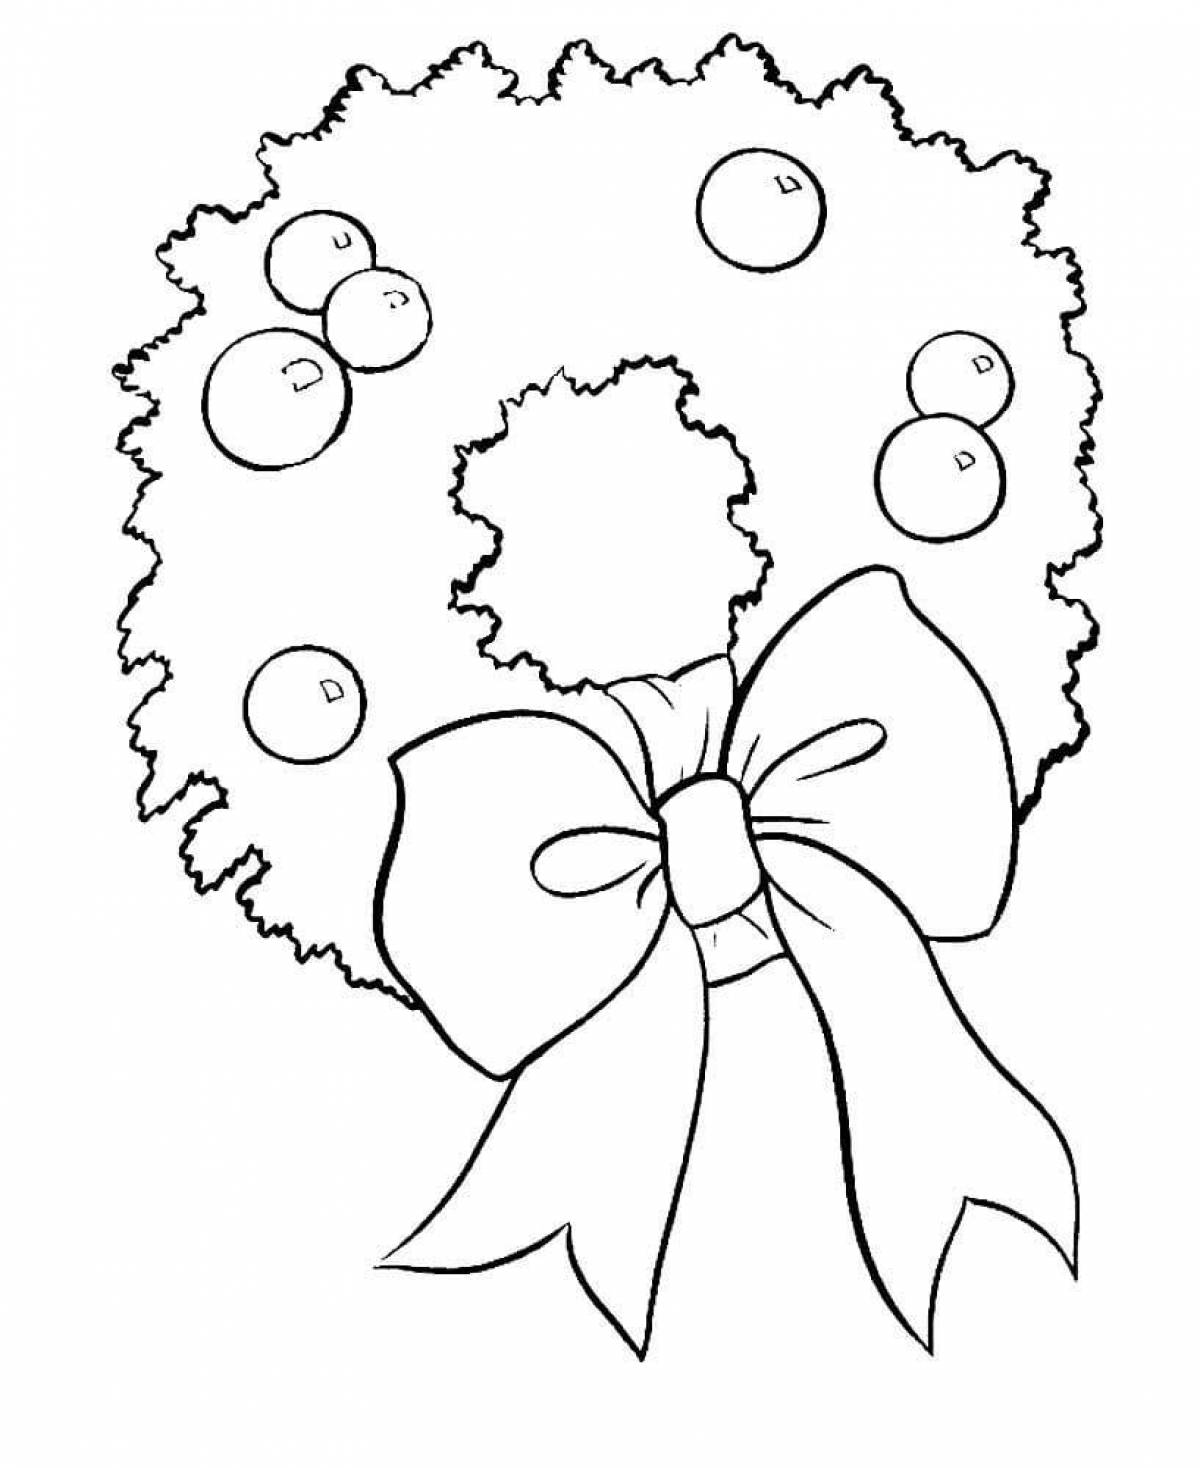 Coloring book decorated Christmas wreath